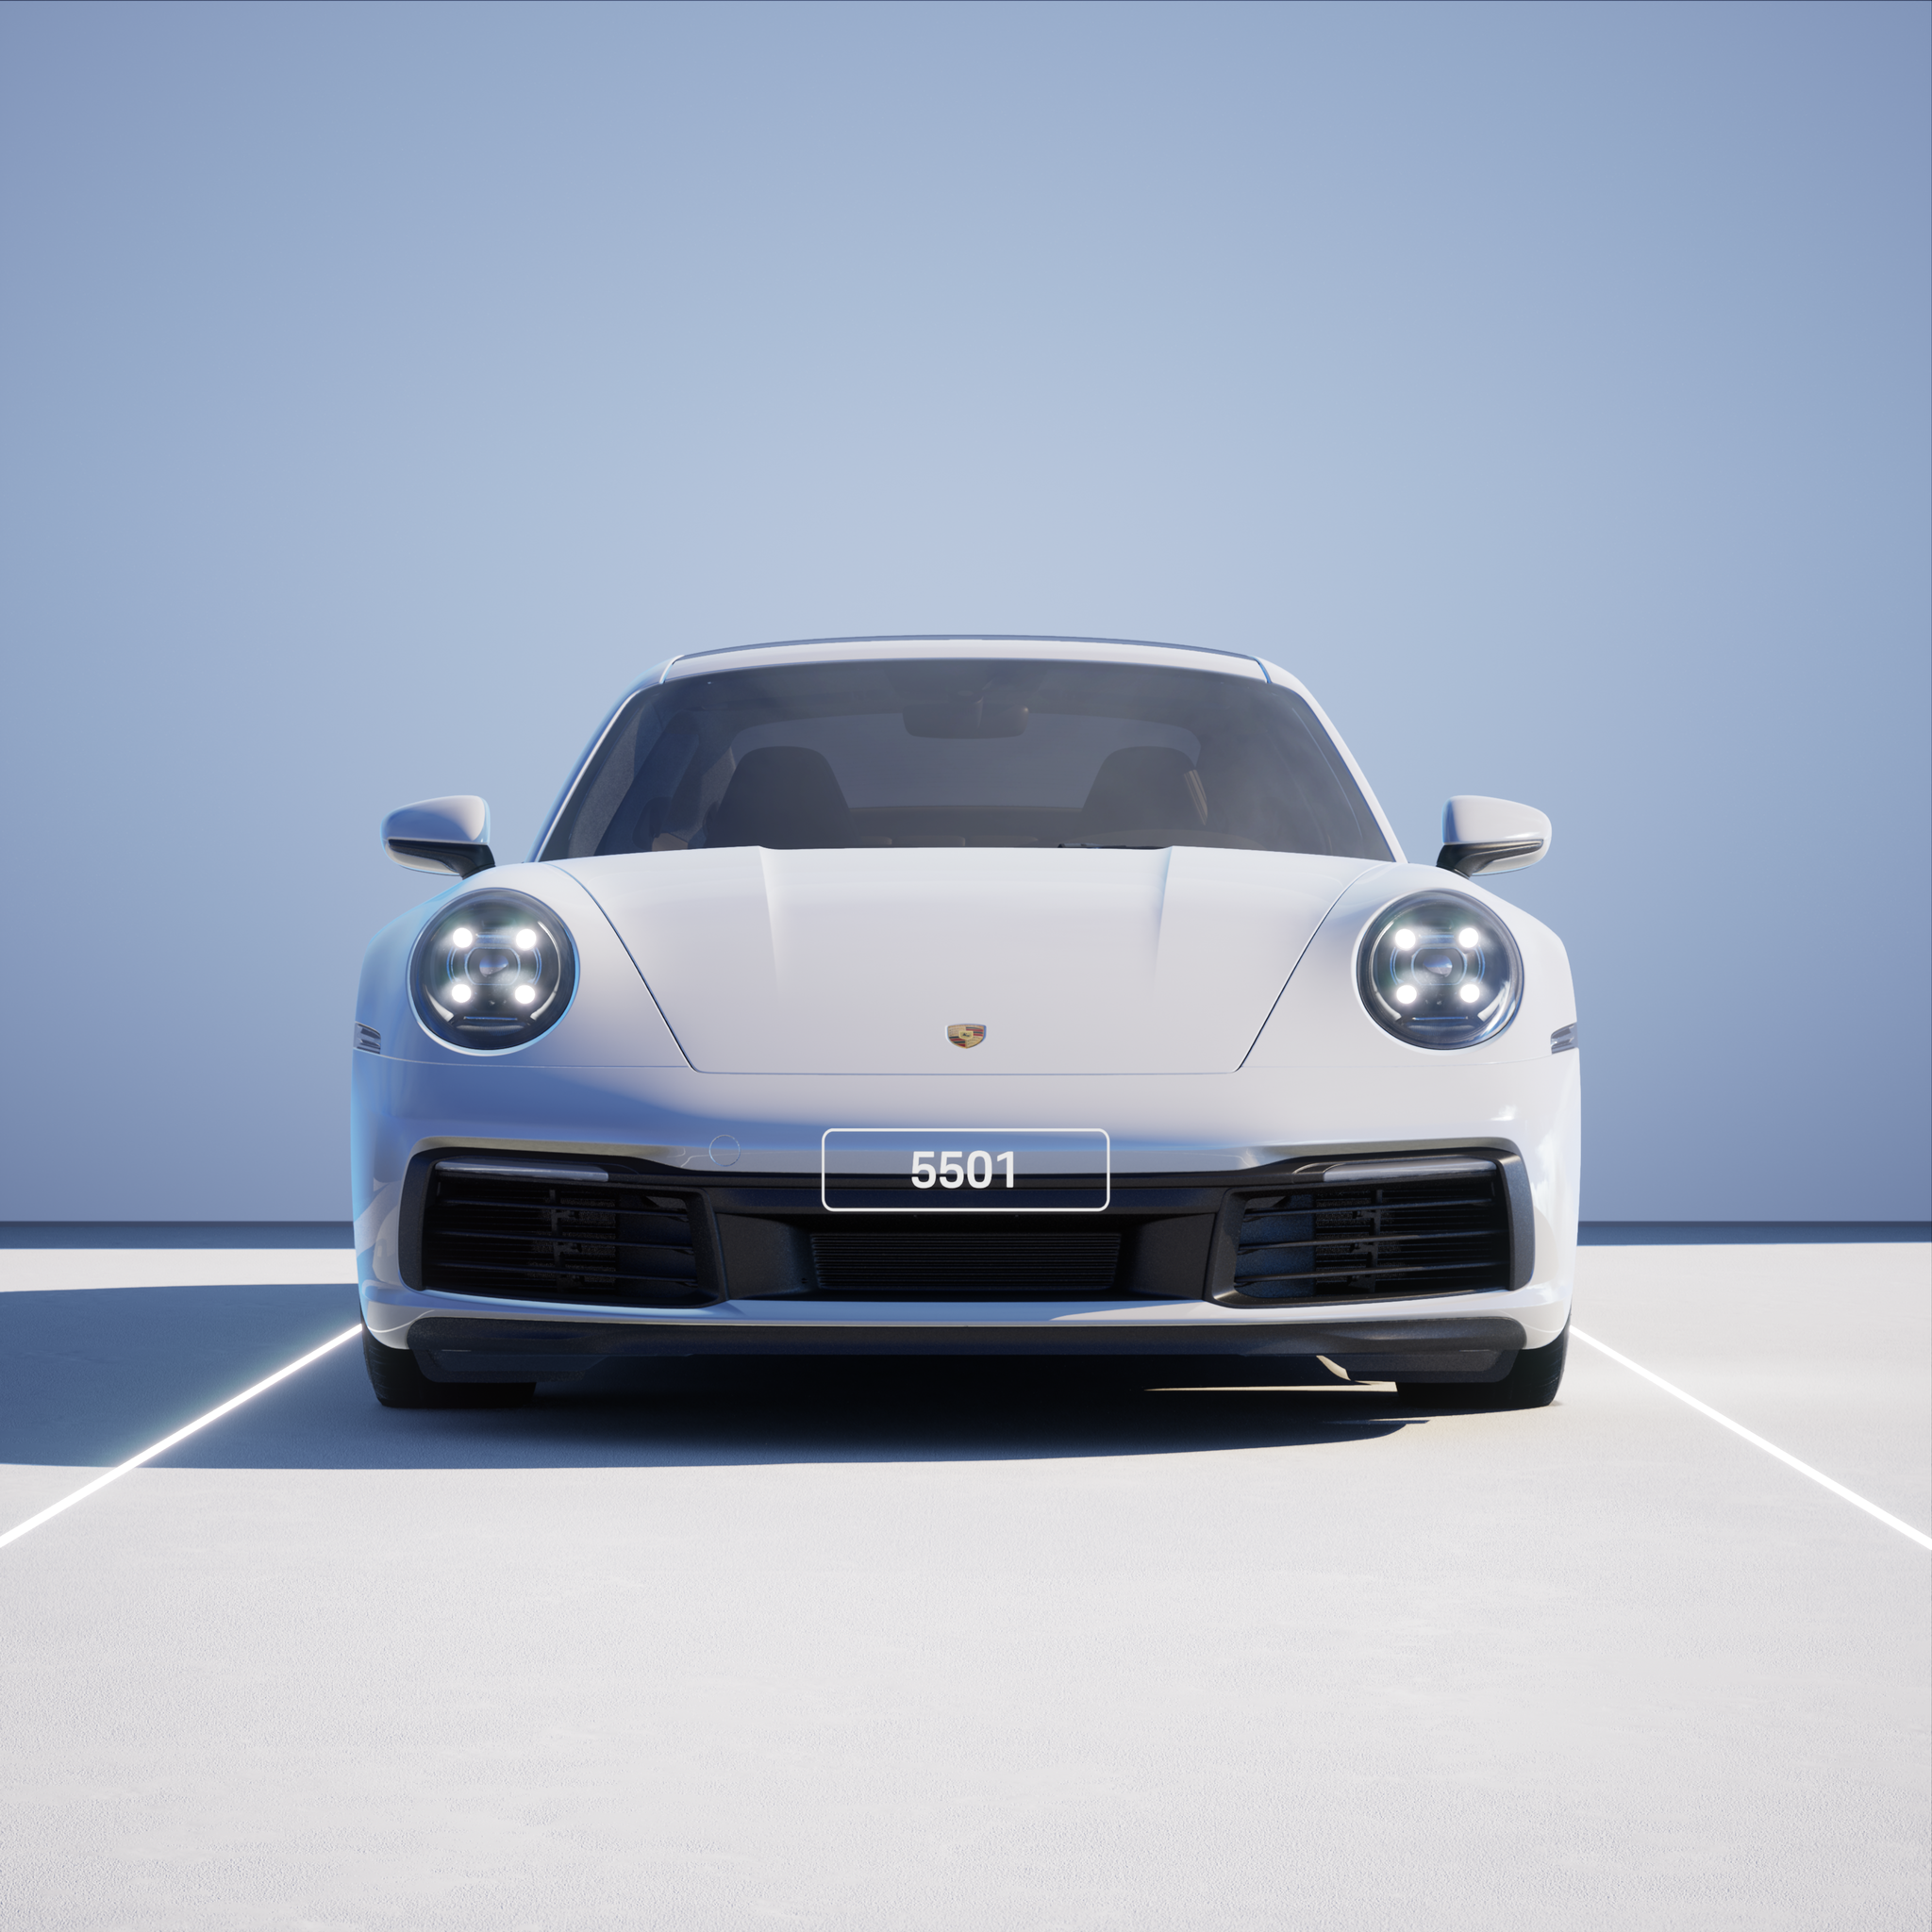 The PORSCHΞ 911 5501 image in phase